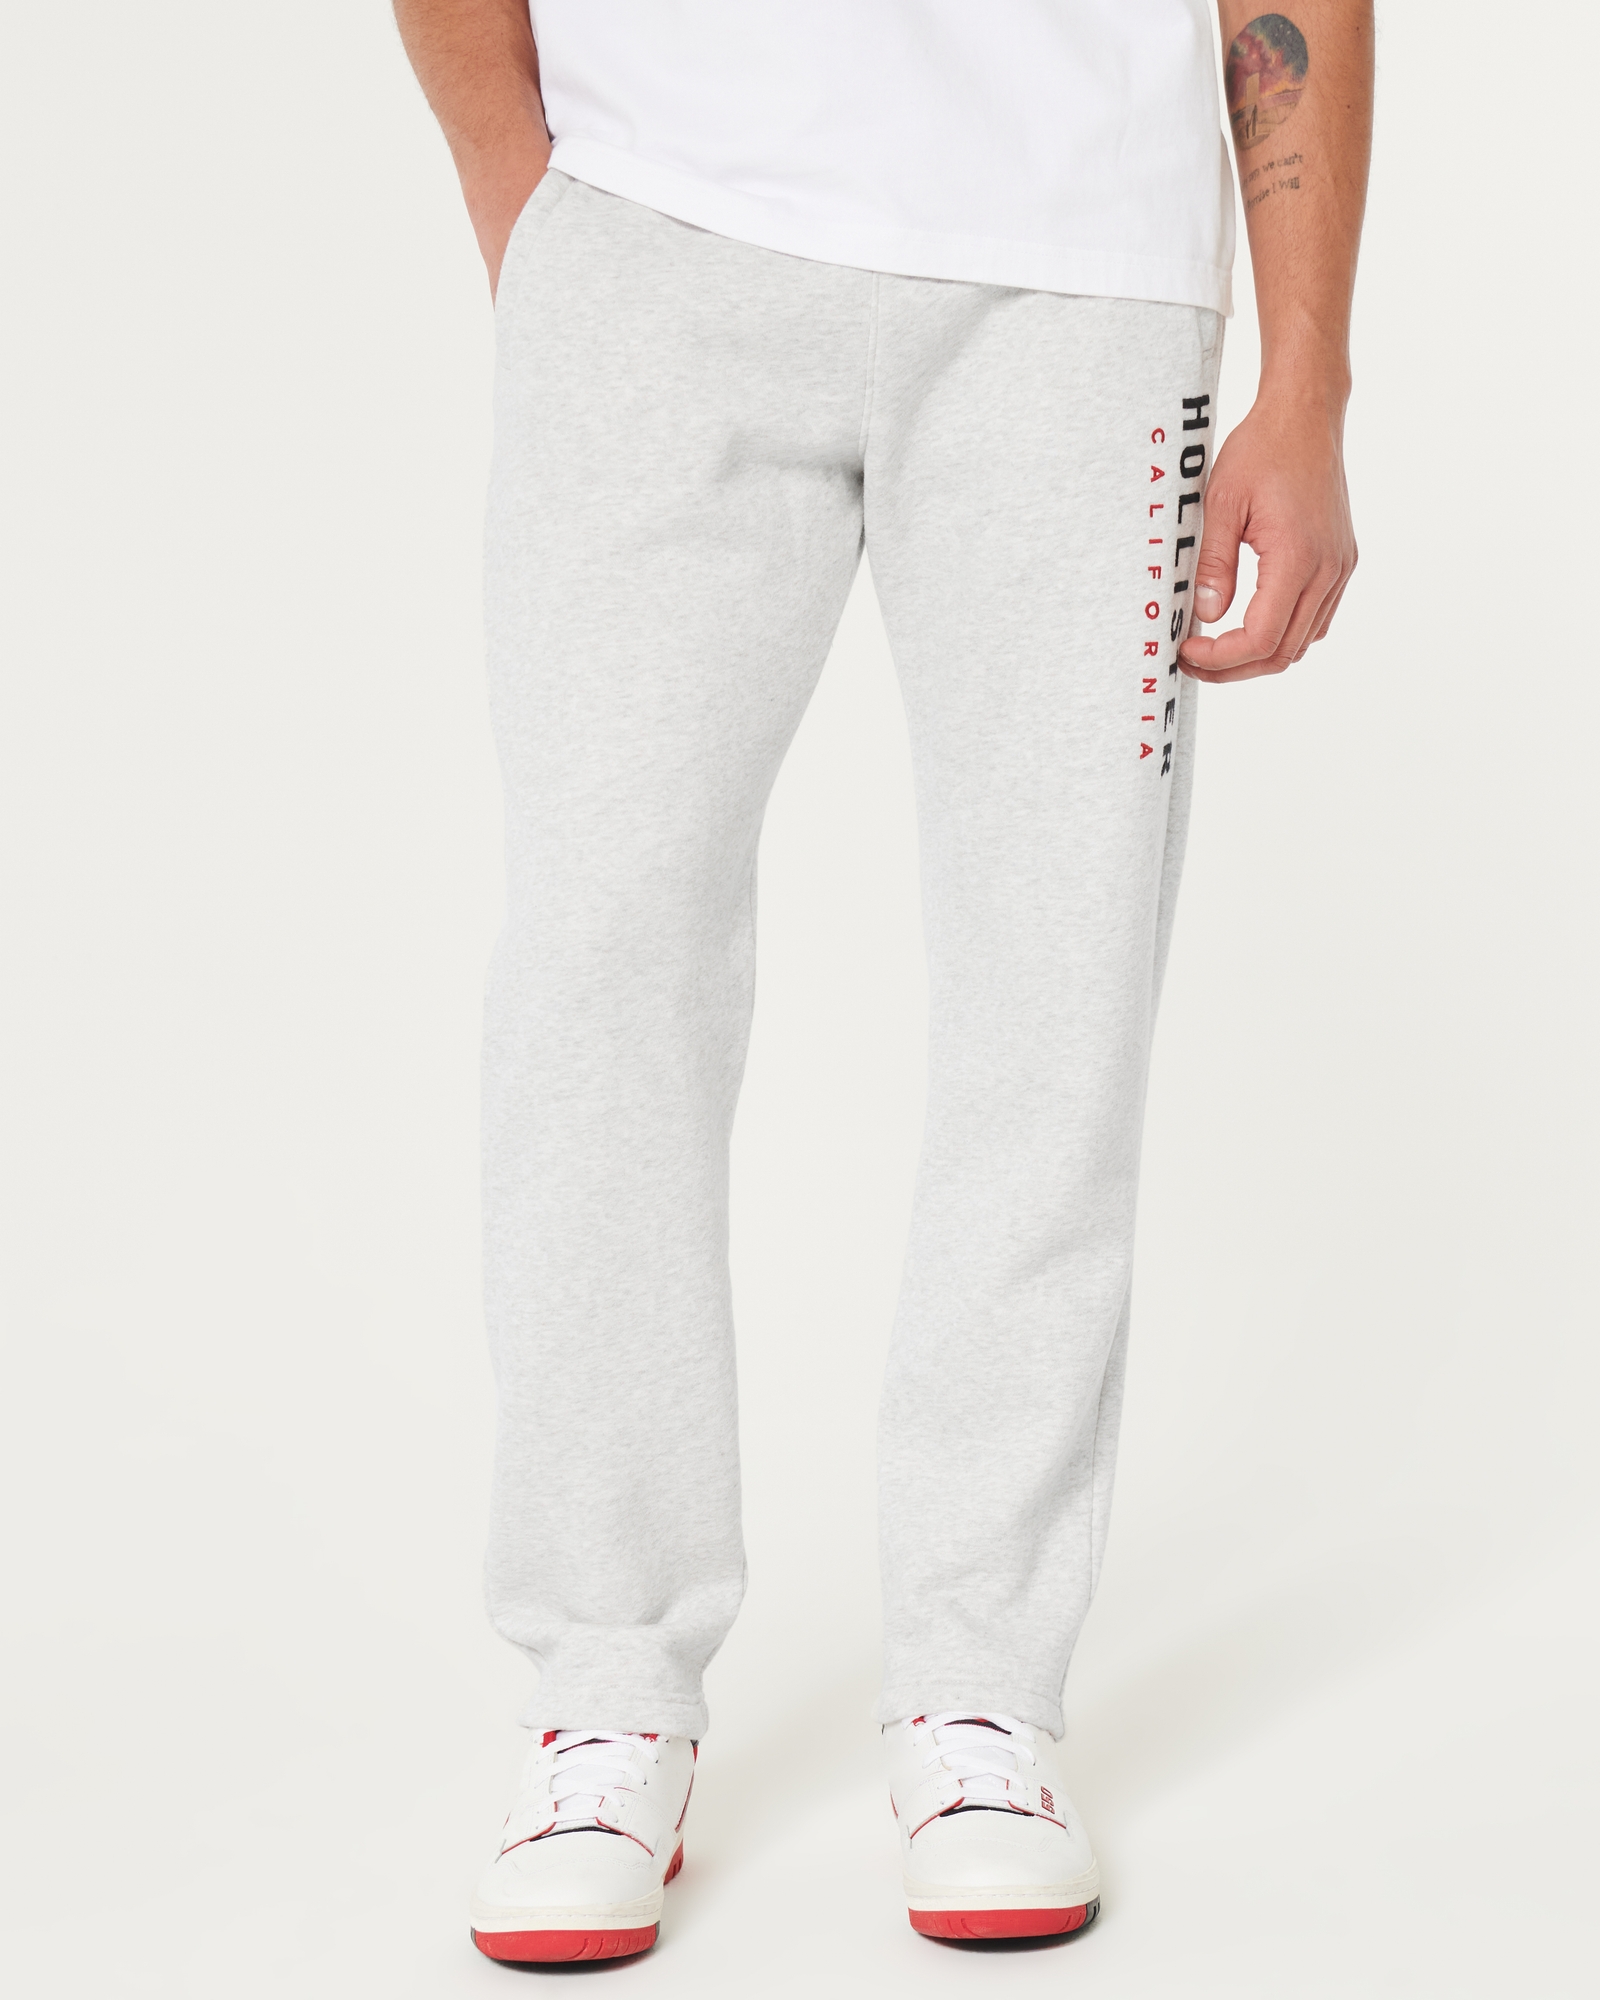 Hollister Co. Red Athletic Sweat Pants for Women